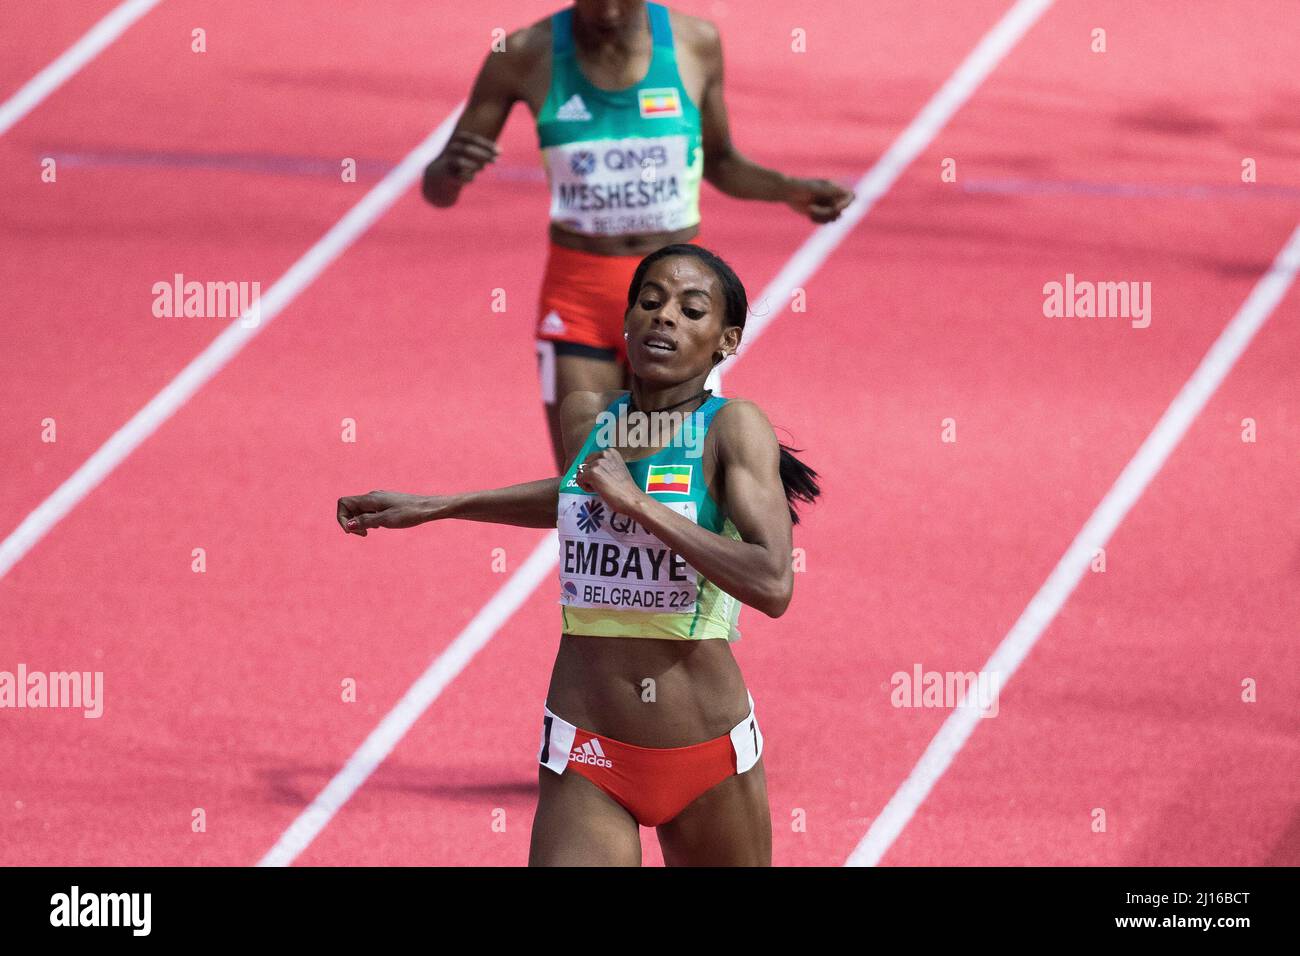 Belgrade, Serbia, 19th March 2022. Axumawit Embaye of Ethiopia competes during the World Athletics Indoor Championships Belgrade 2022 - Press Conference in Belgrade, Serbia. March 19, 2022. Credit: Nikola Krstic/Alamy Stock Photo